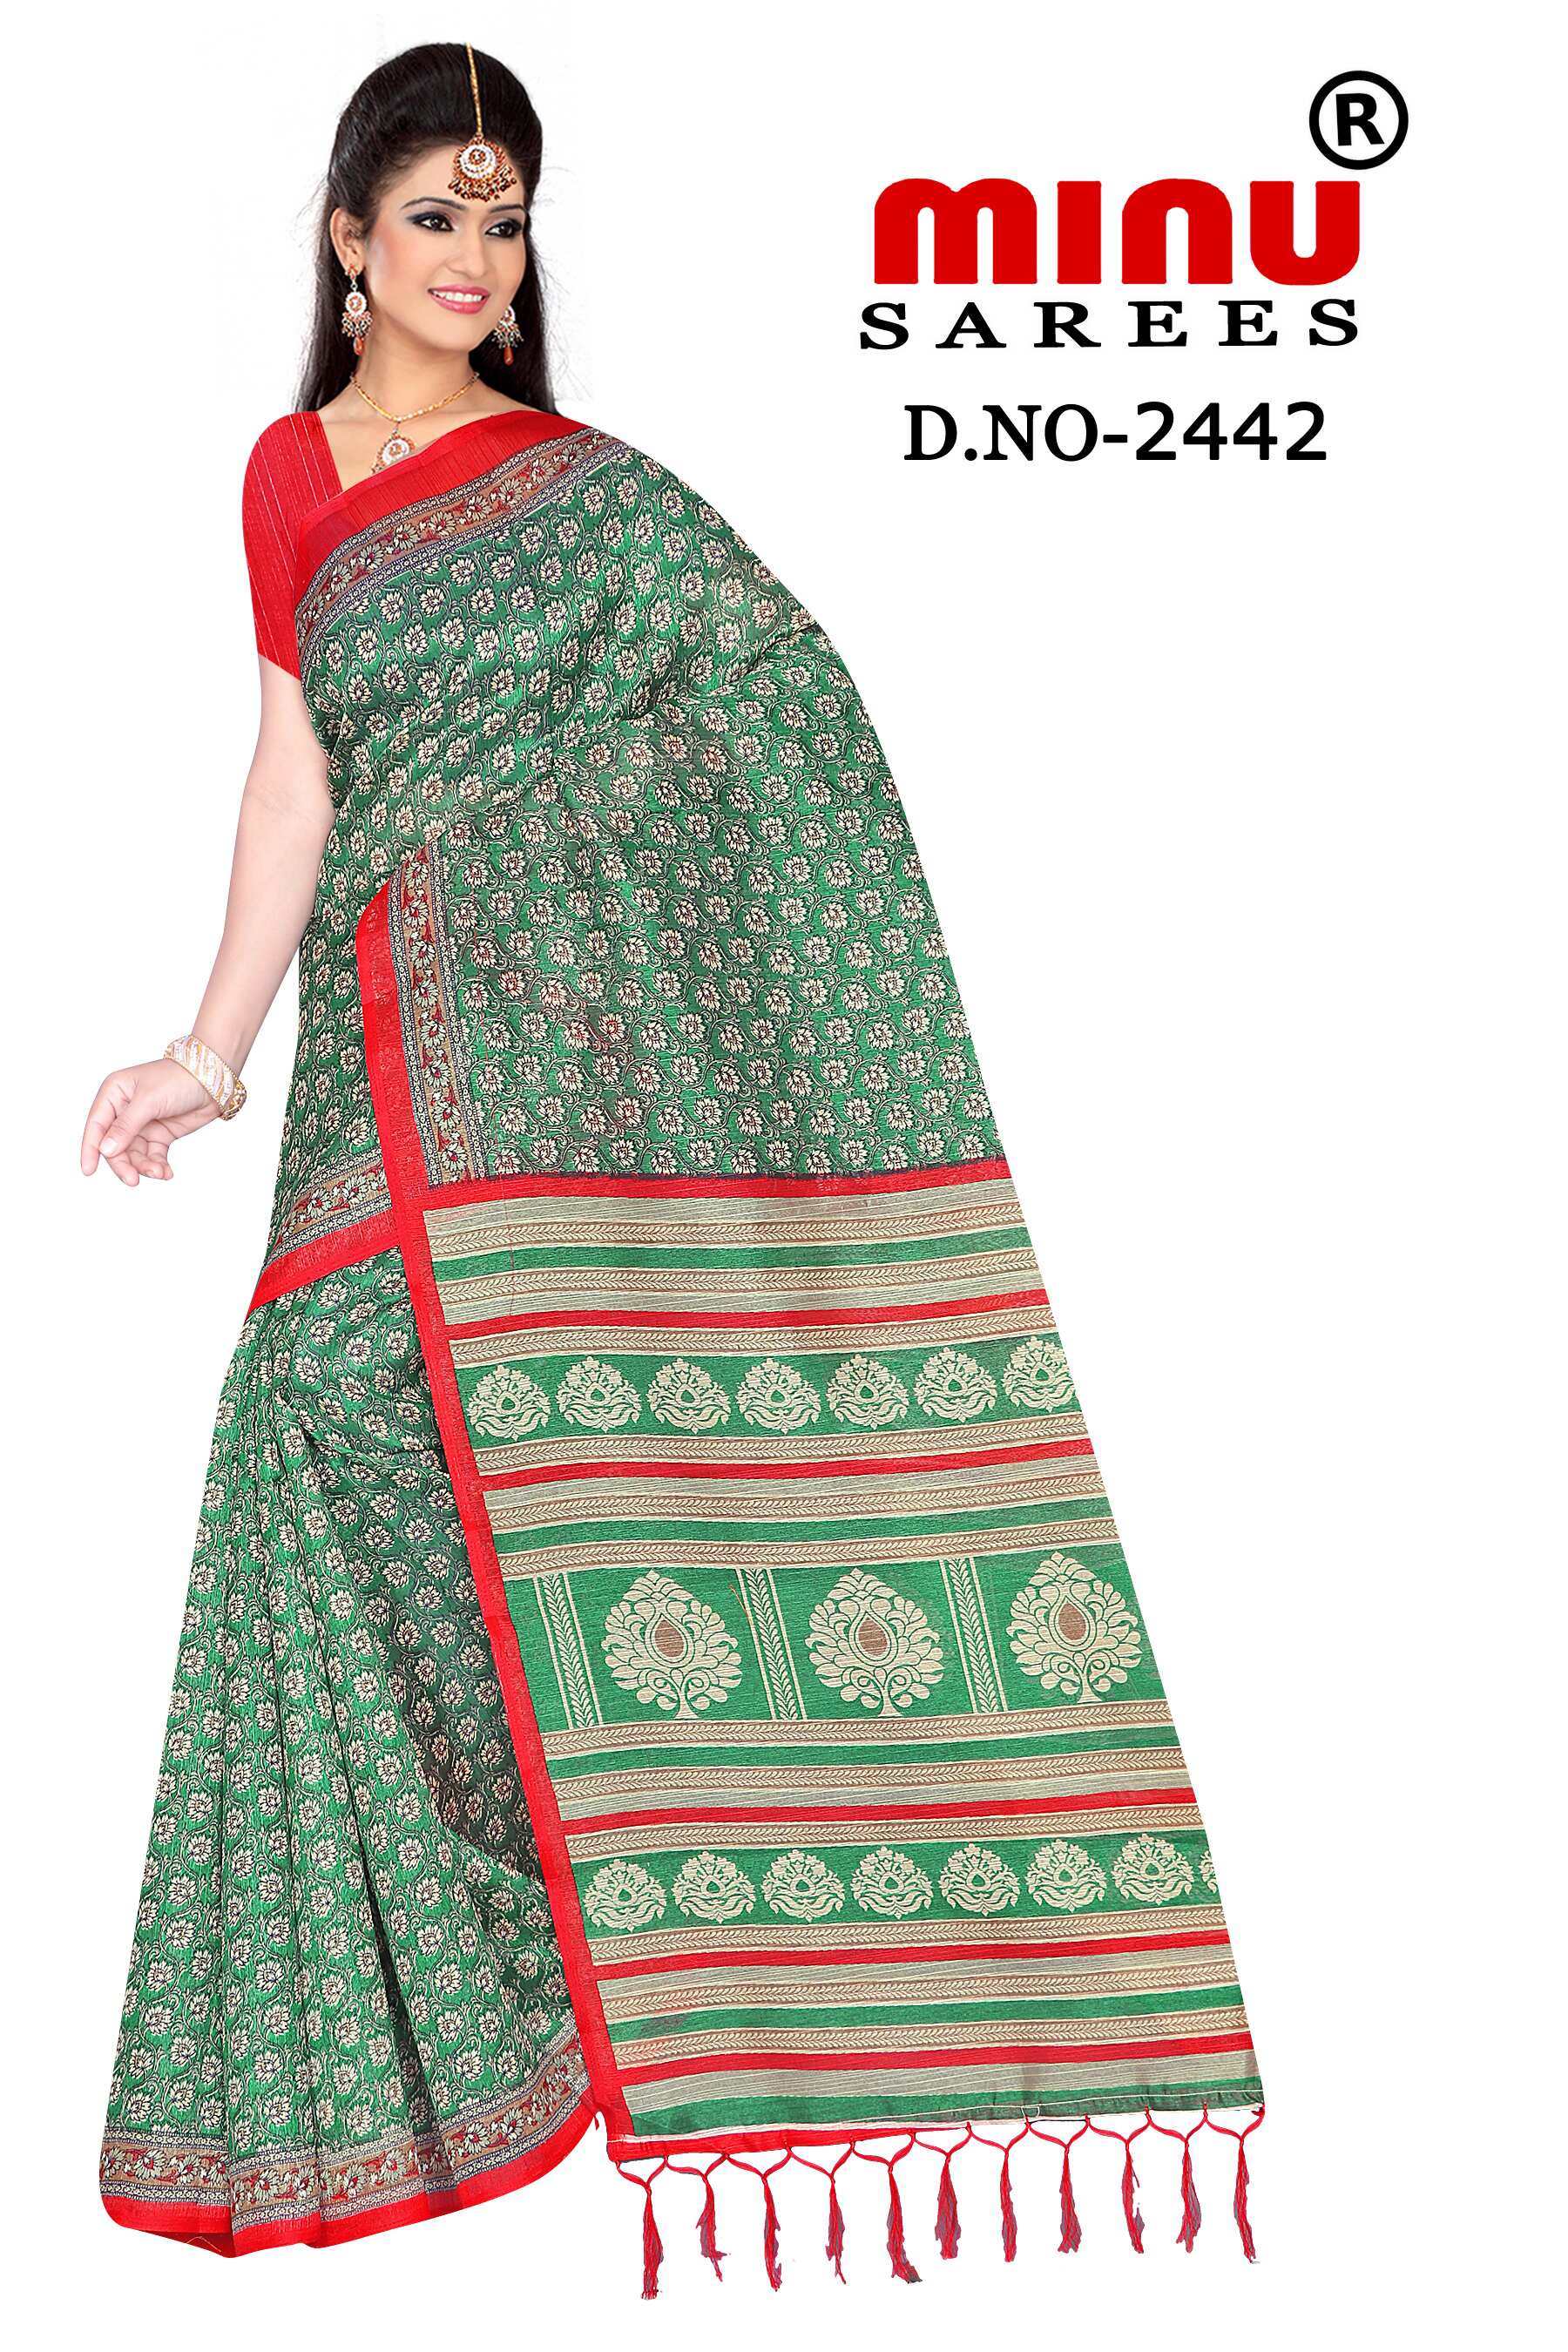 Woman looking extremely gorgeous in green printed fancy saree image